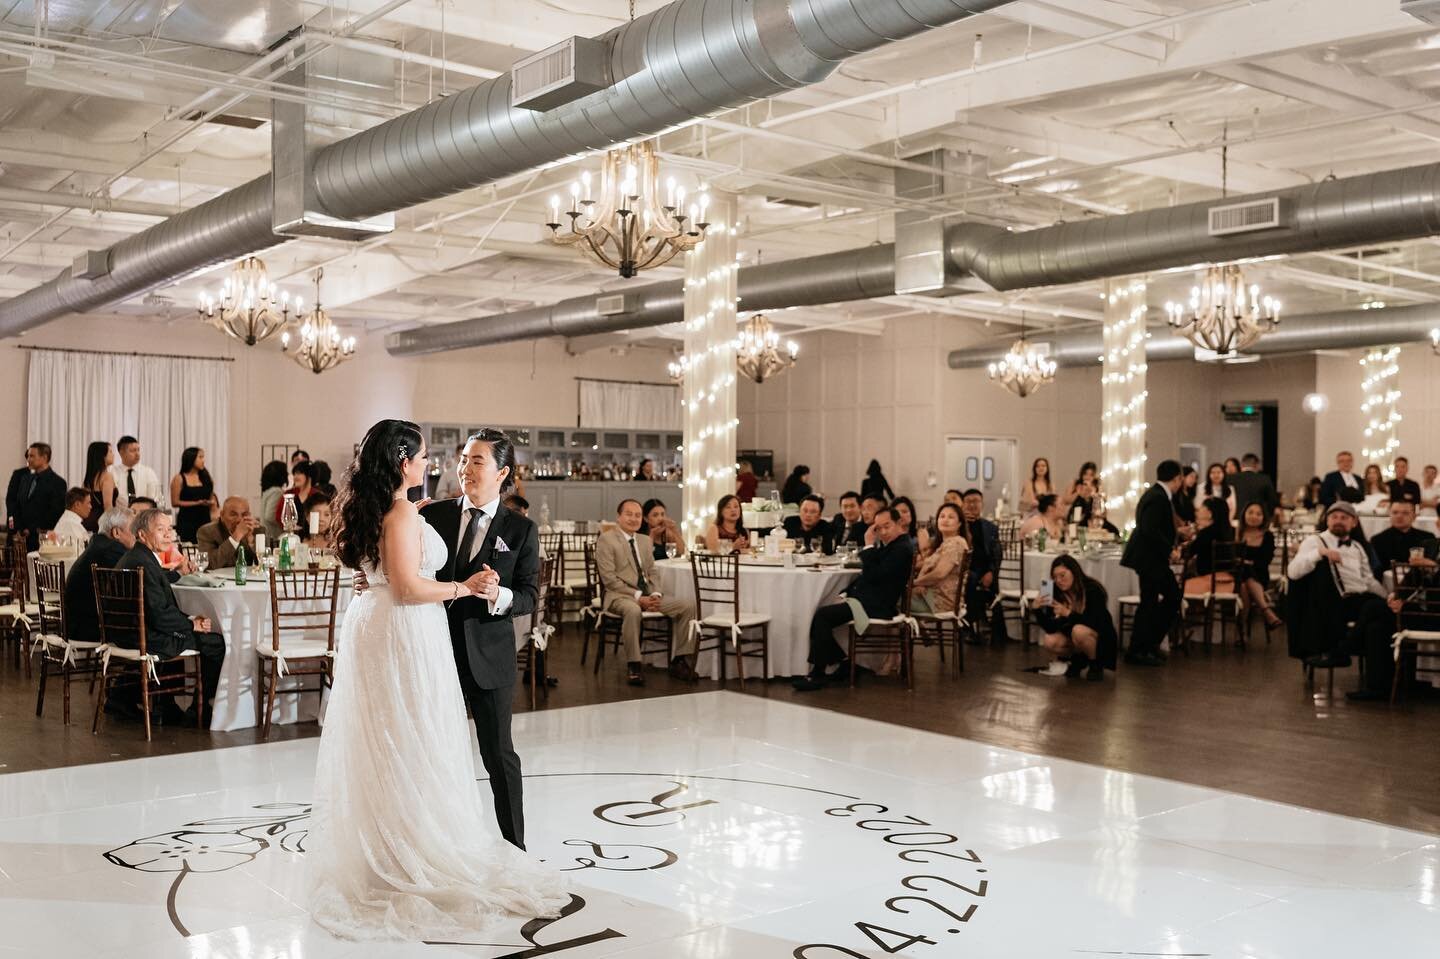 From your first dance together to your first exit as a married couple&hellip;the photographers always make sure to capture the best moments 🤍✨
.
Venue: @fetethevenue 
Photography and videography: @symboll 
Planner: @melliebeeevents 
Florist: @letave